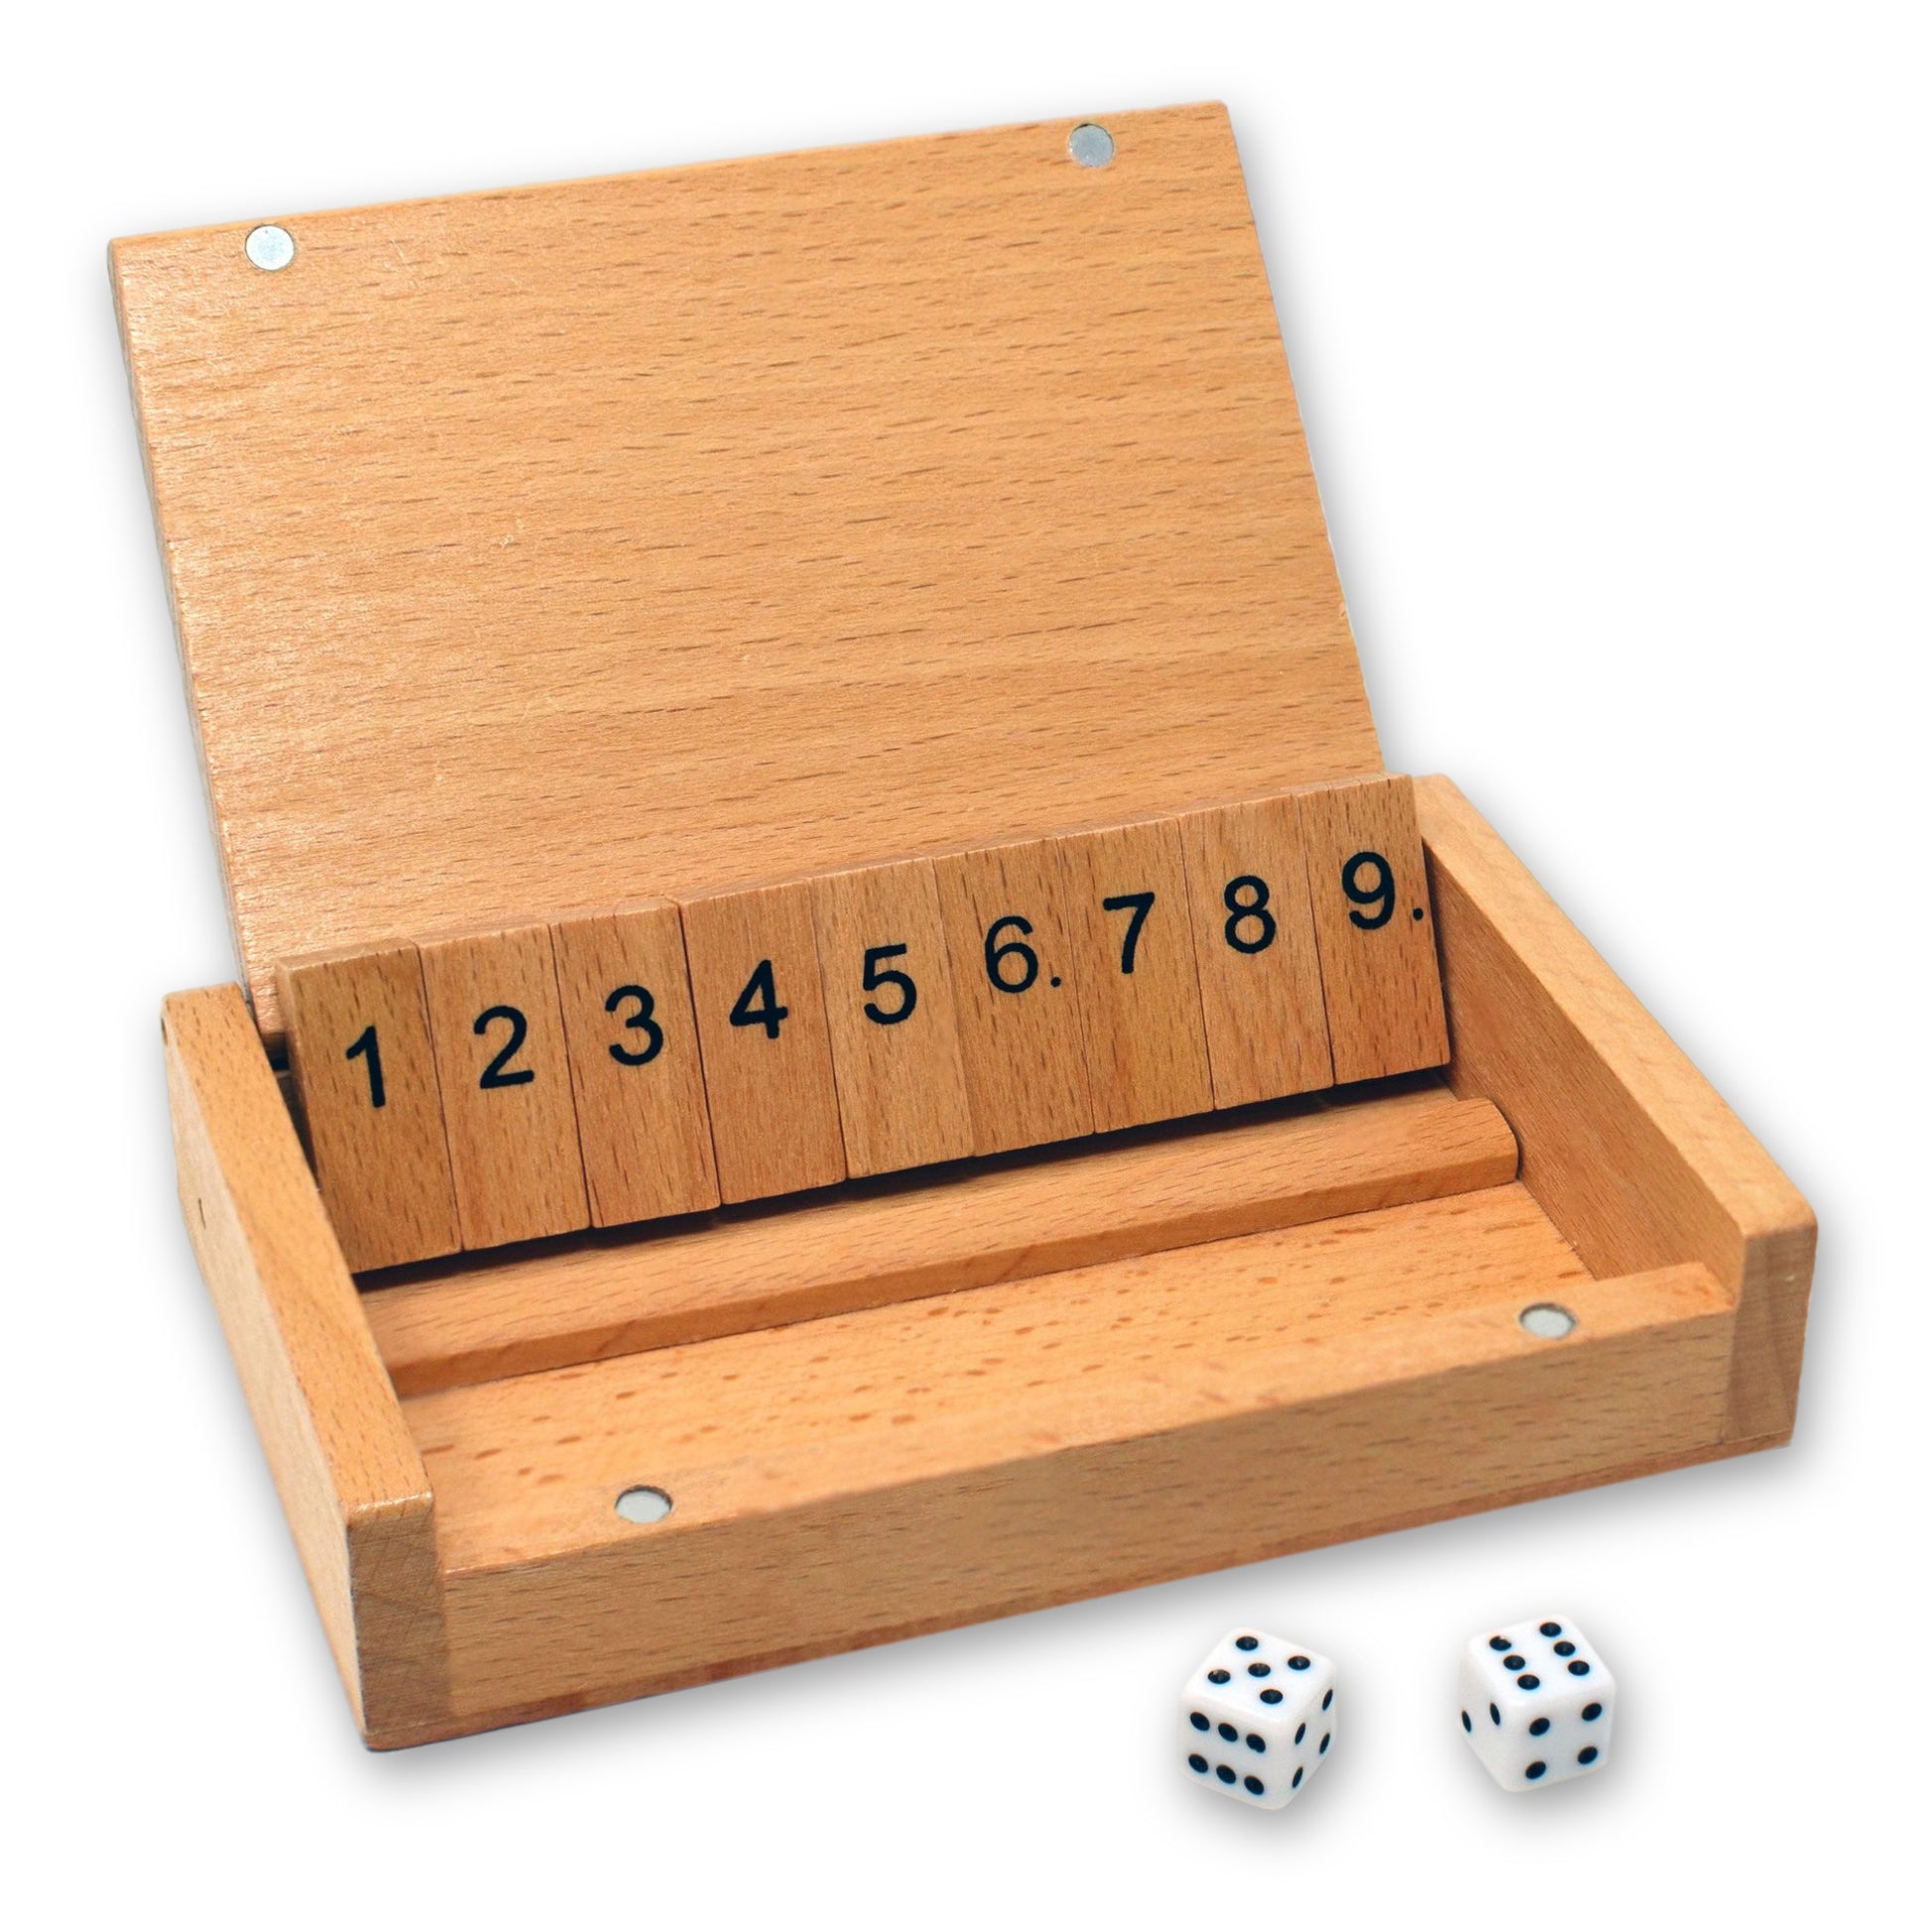 Custom Shut The Box Wooden Dice Game by Velocity Promotions - ShutTheBoxGame